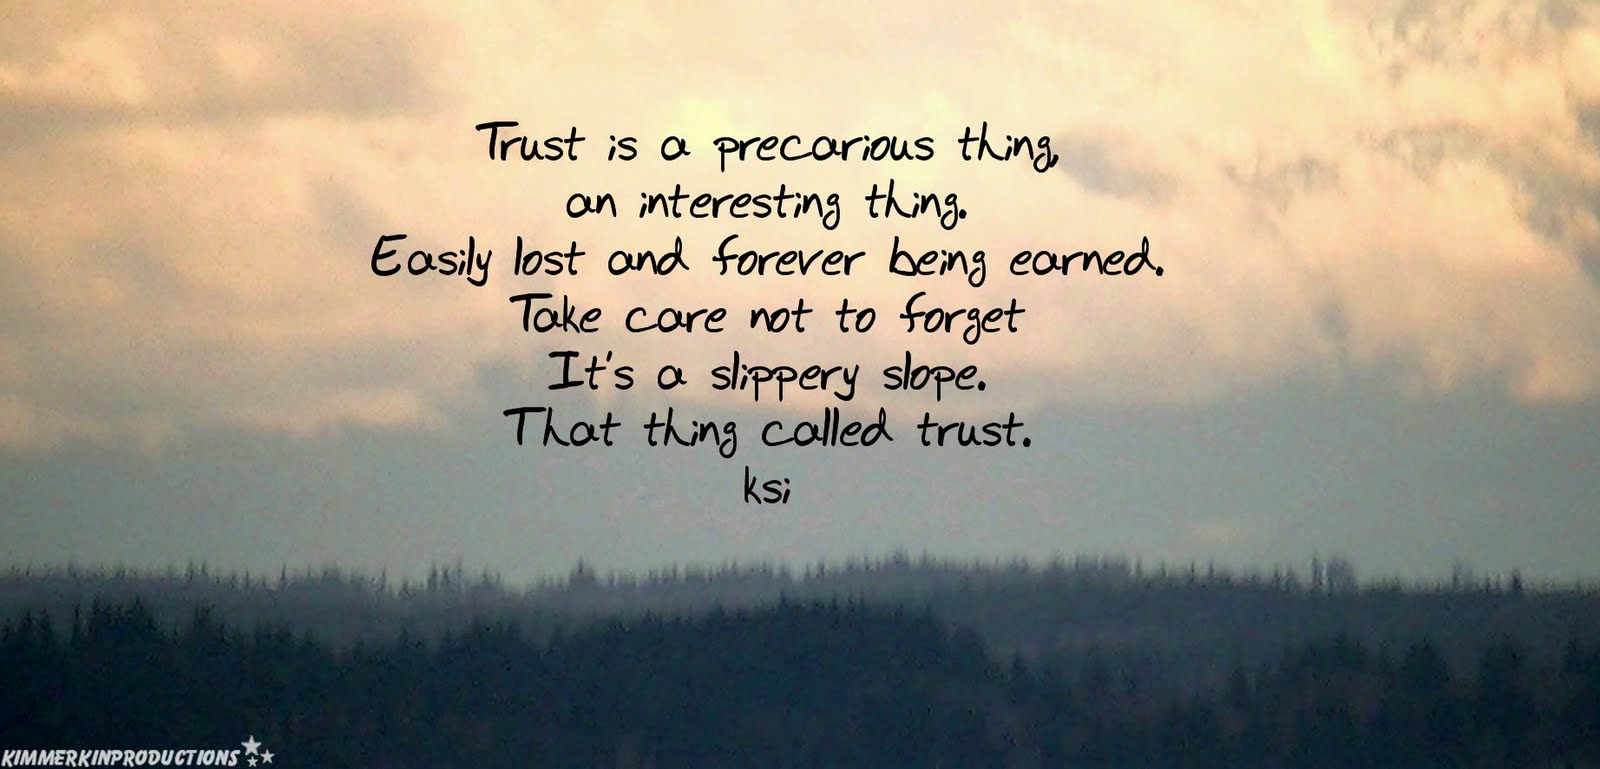 Quotes About Not Trusting People. QuotesGram